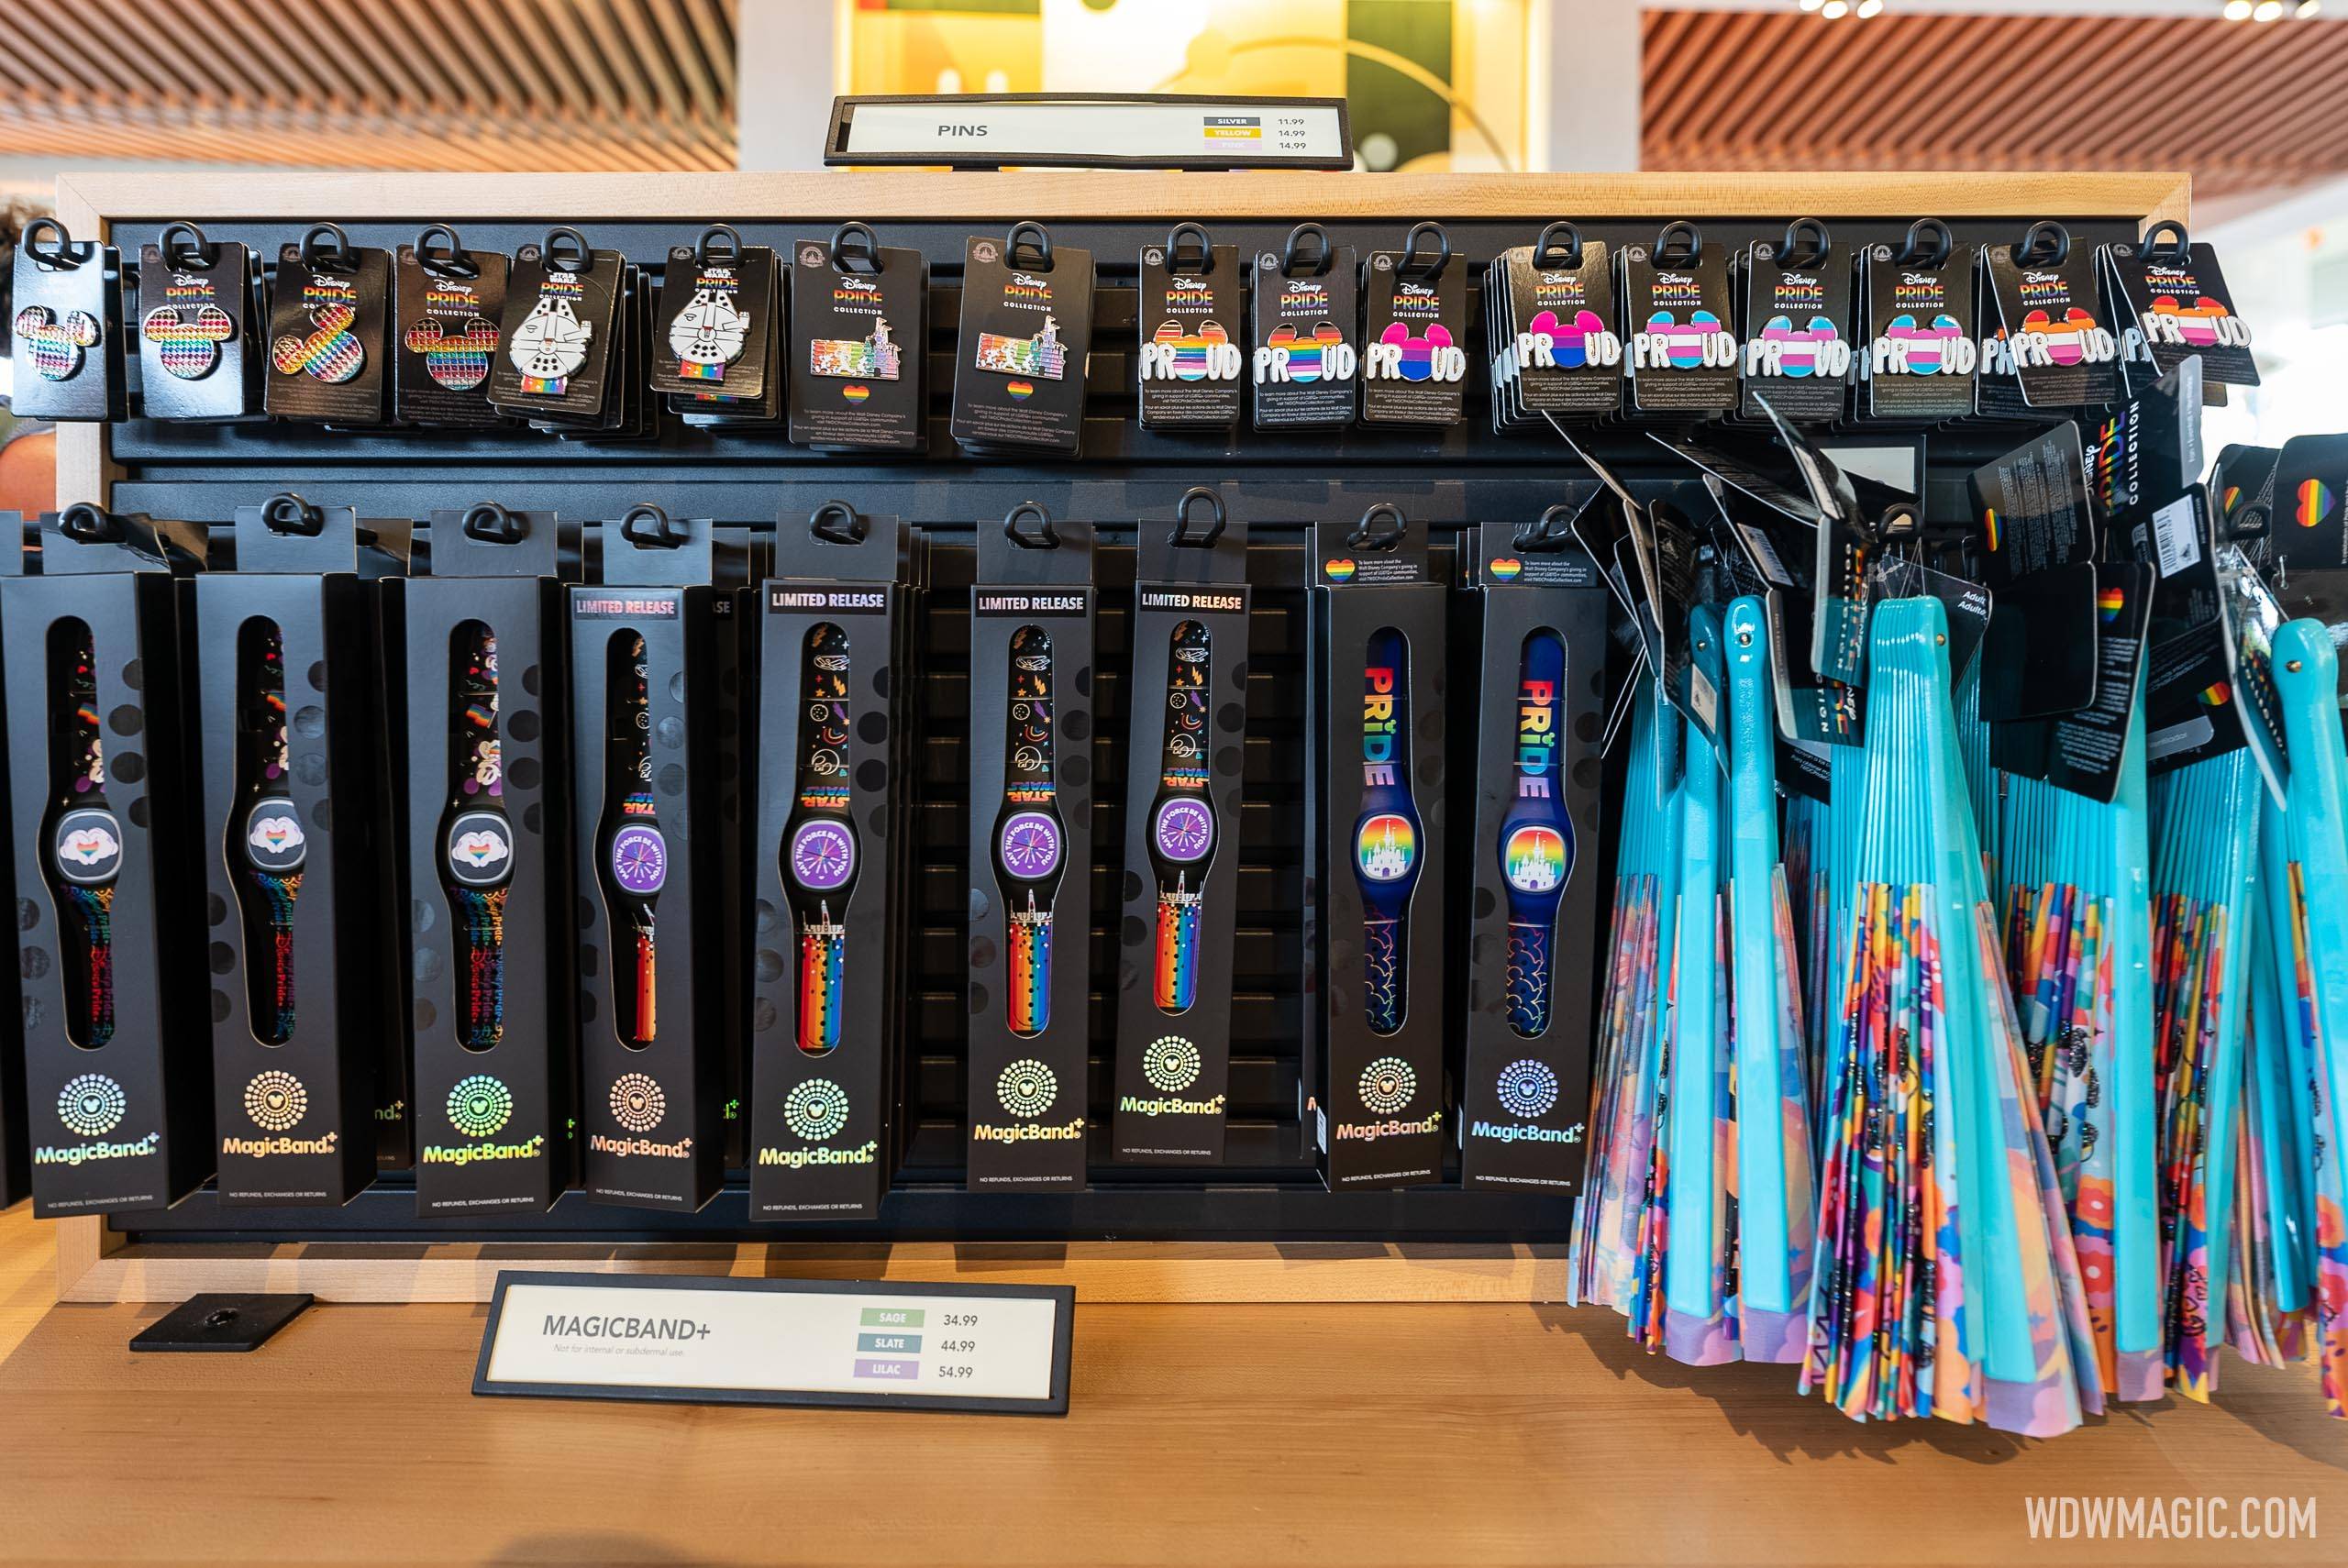 Disney 2023 PRIDE merchandise collection in Creations Shop at EPCOT